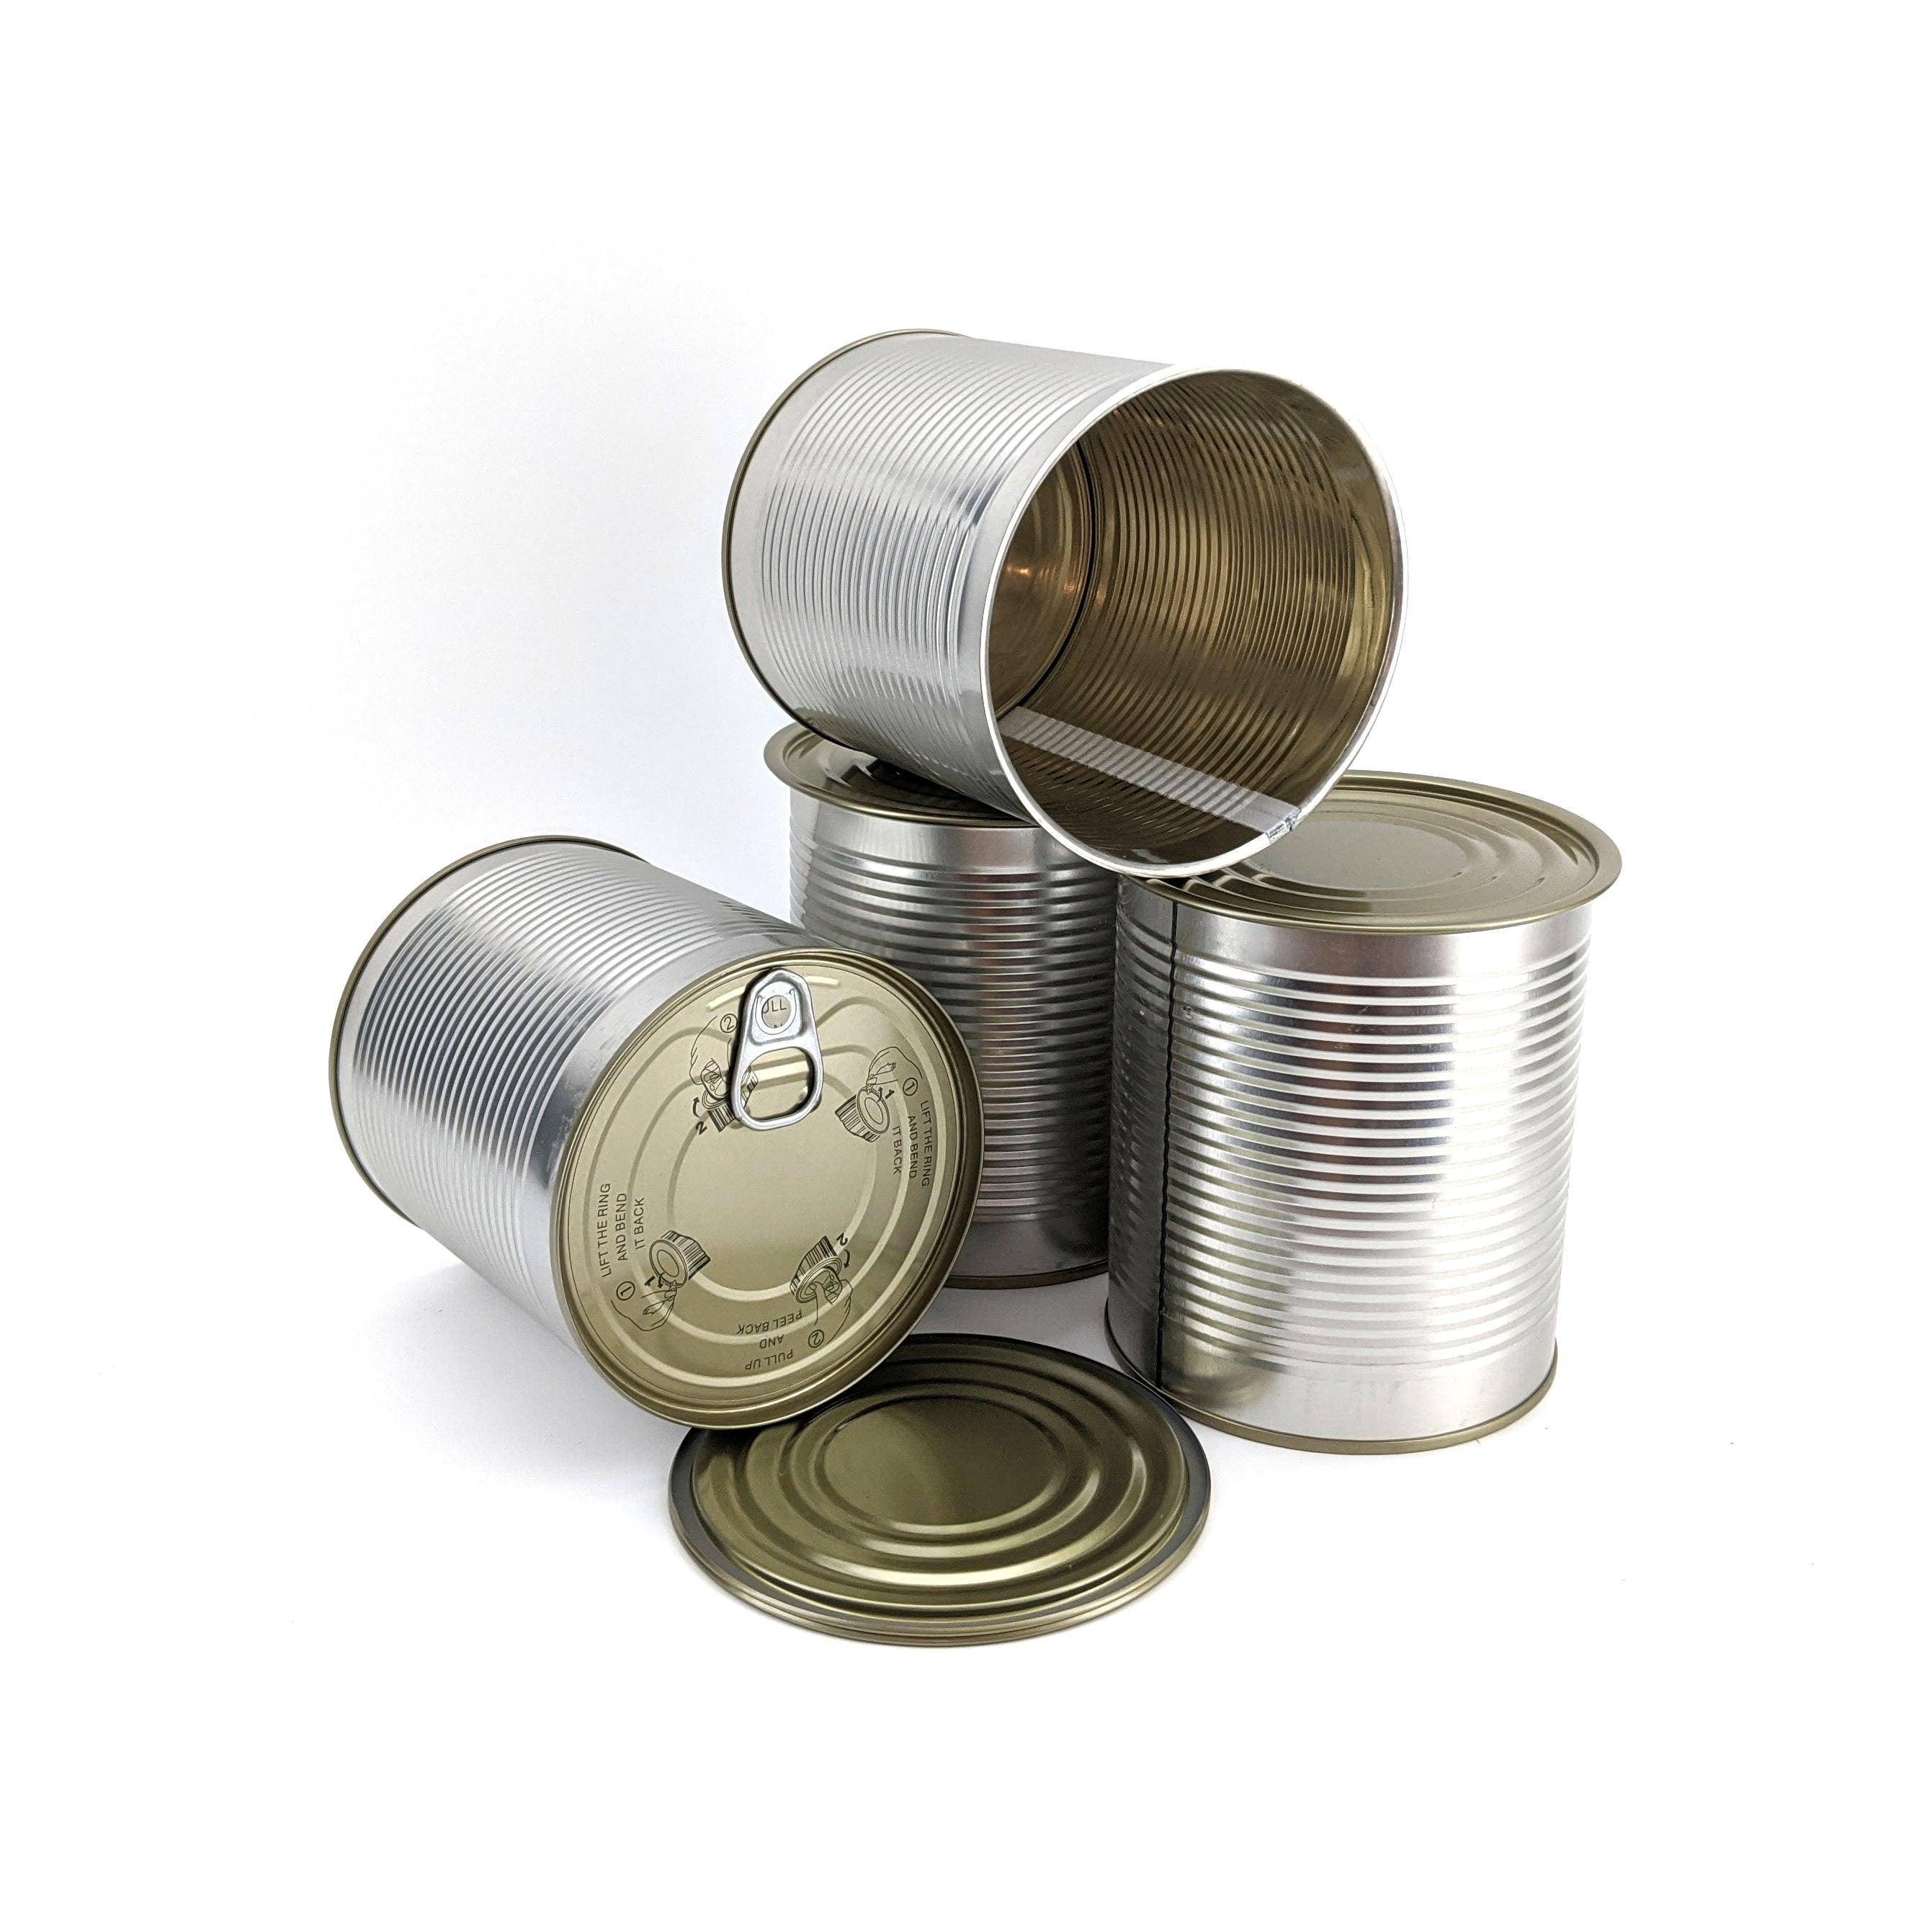 Tin Coated Steel Tin Can - For Cannular Can Seamer (baked bean